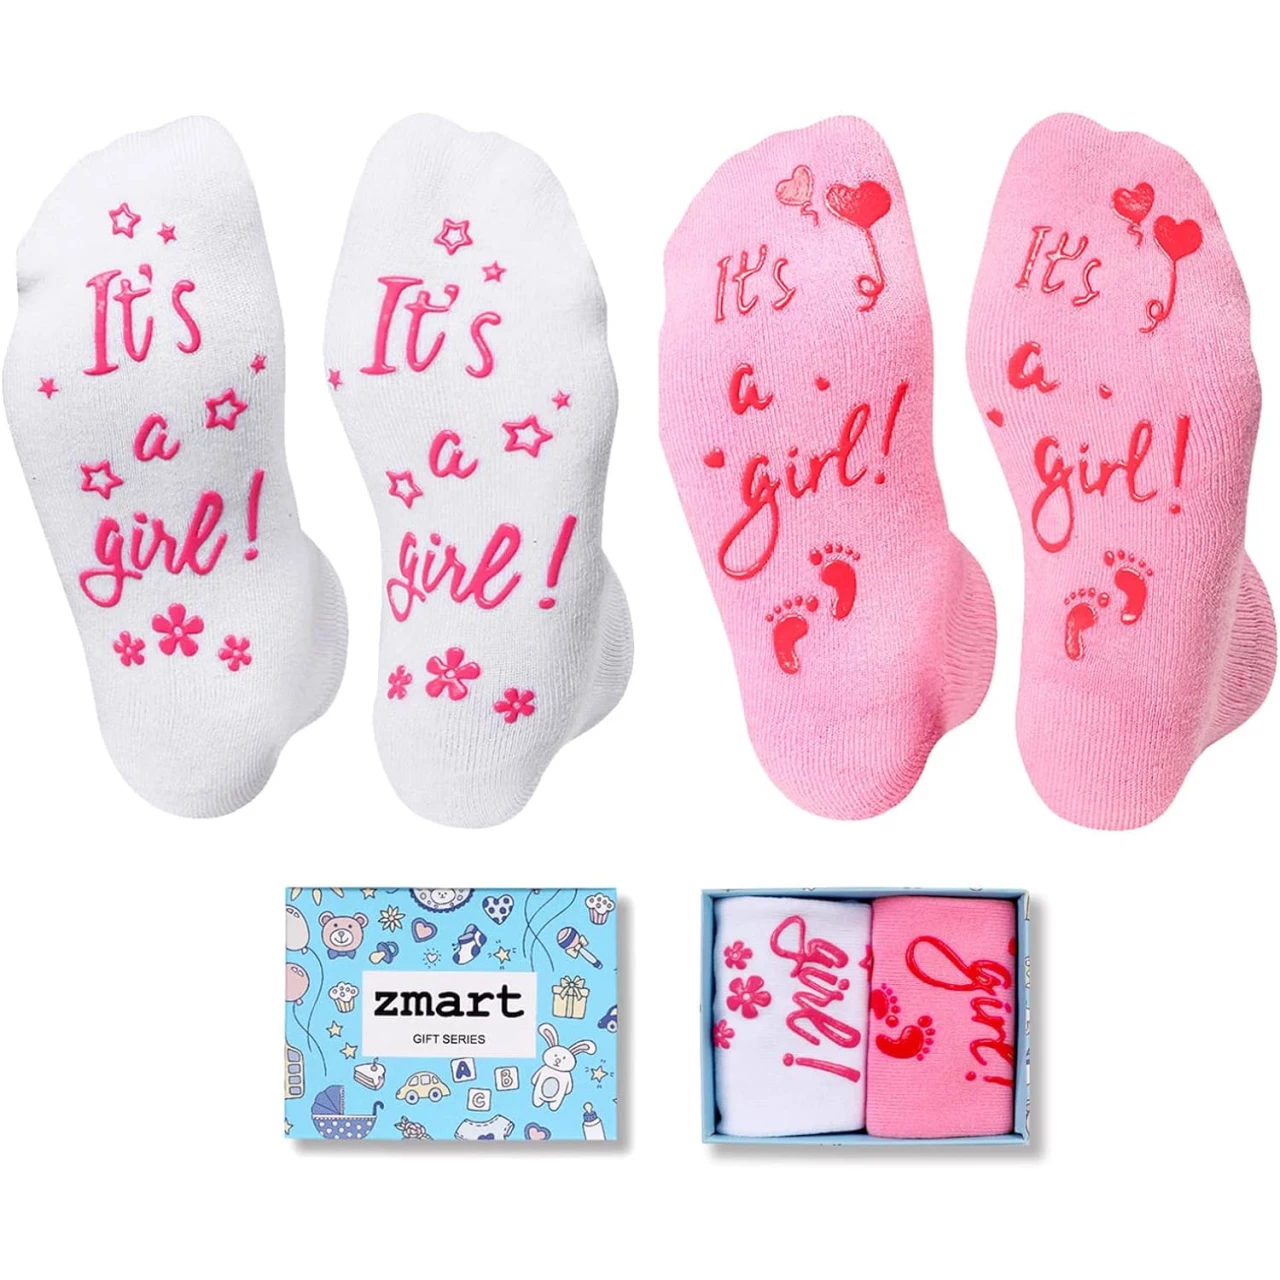 Zmart Gifts for Pregnant Mom Pregnancy Gifts Maternity Gifts, Labor Socks for Hospital 2 Pack